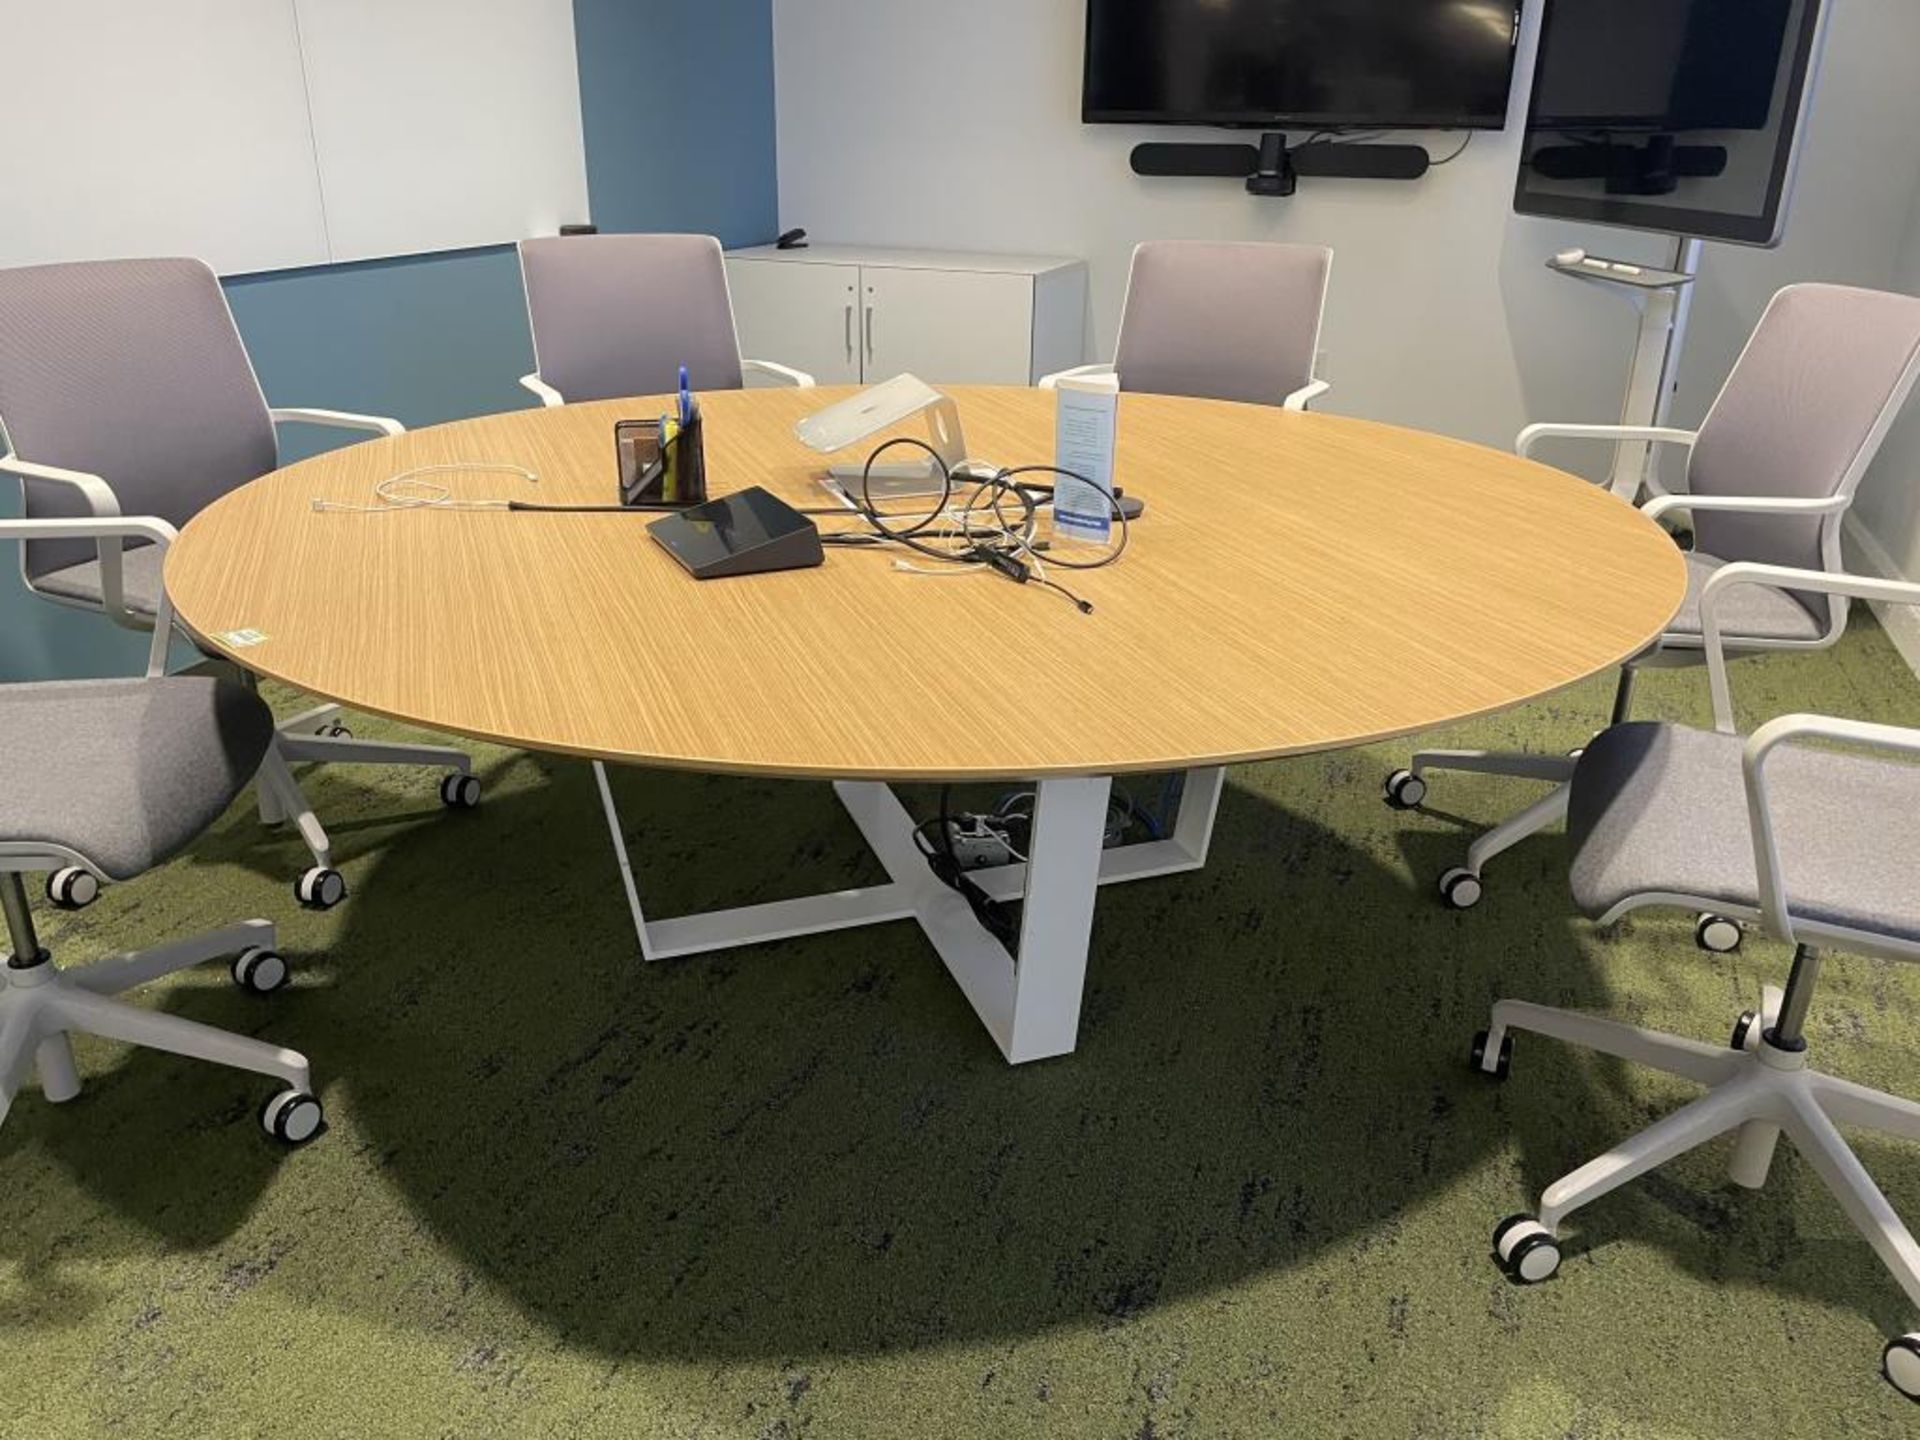 HPL Contract Round Conference Table 7' w/ Senator Task Chairs - Image 2 of 11